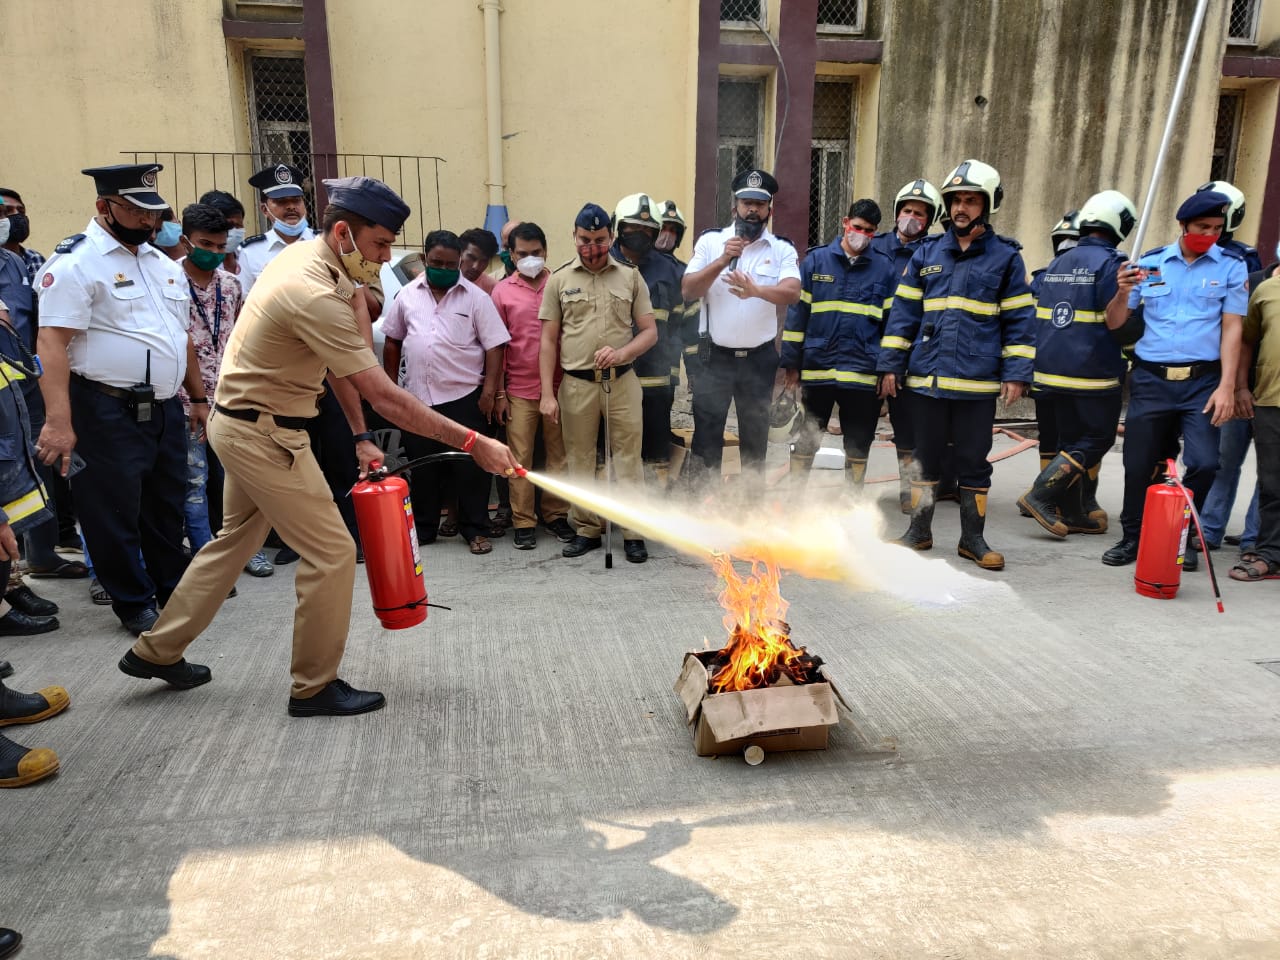 sion hospital fire mock drill